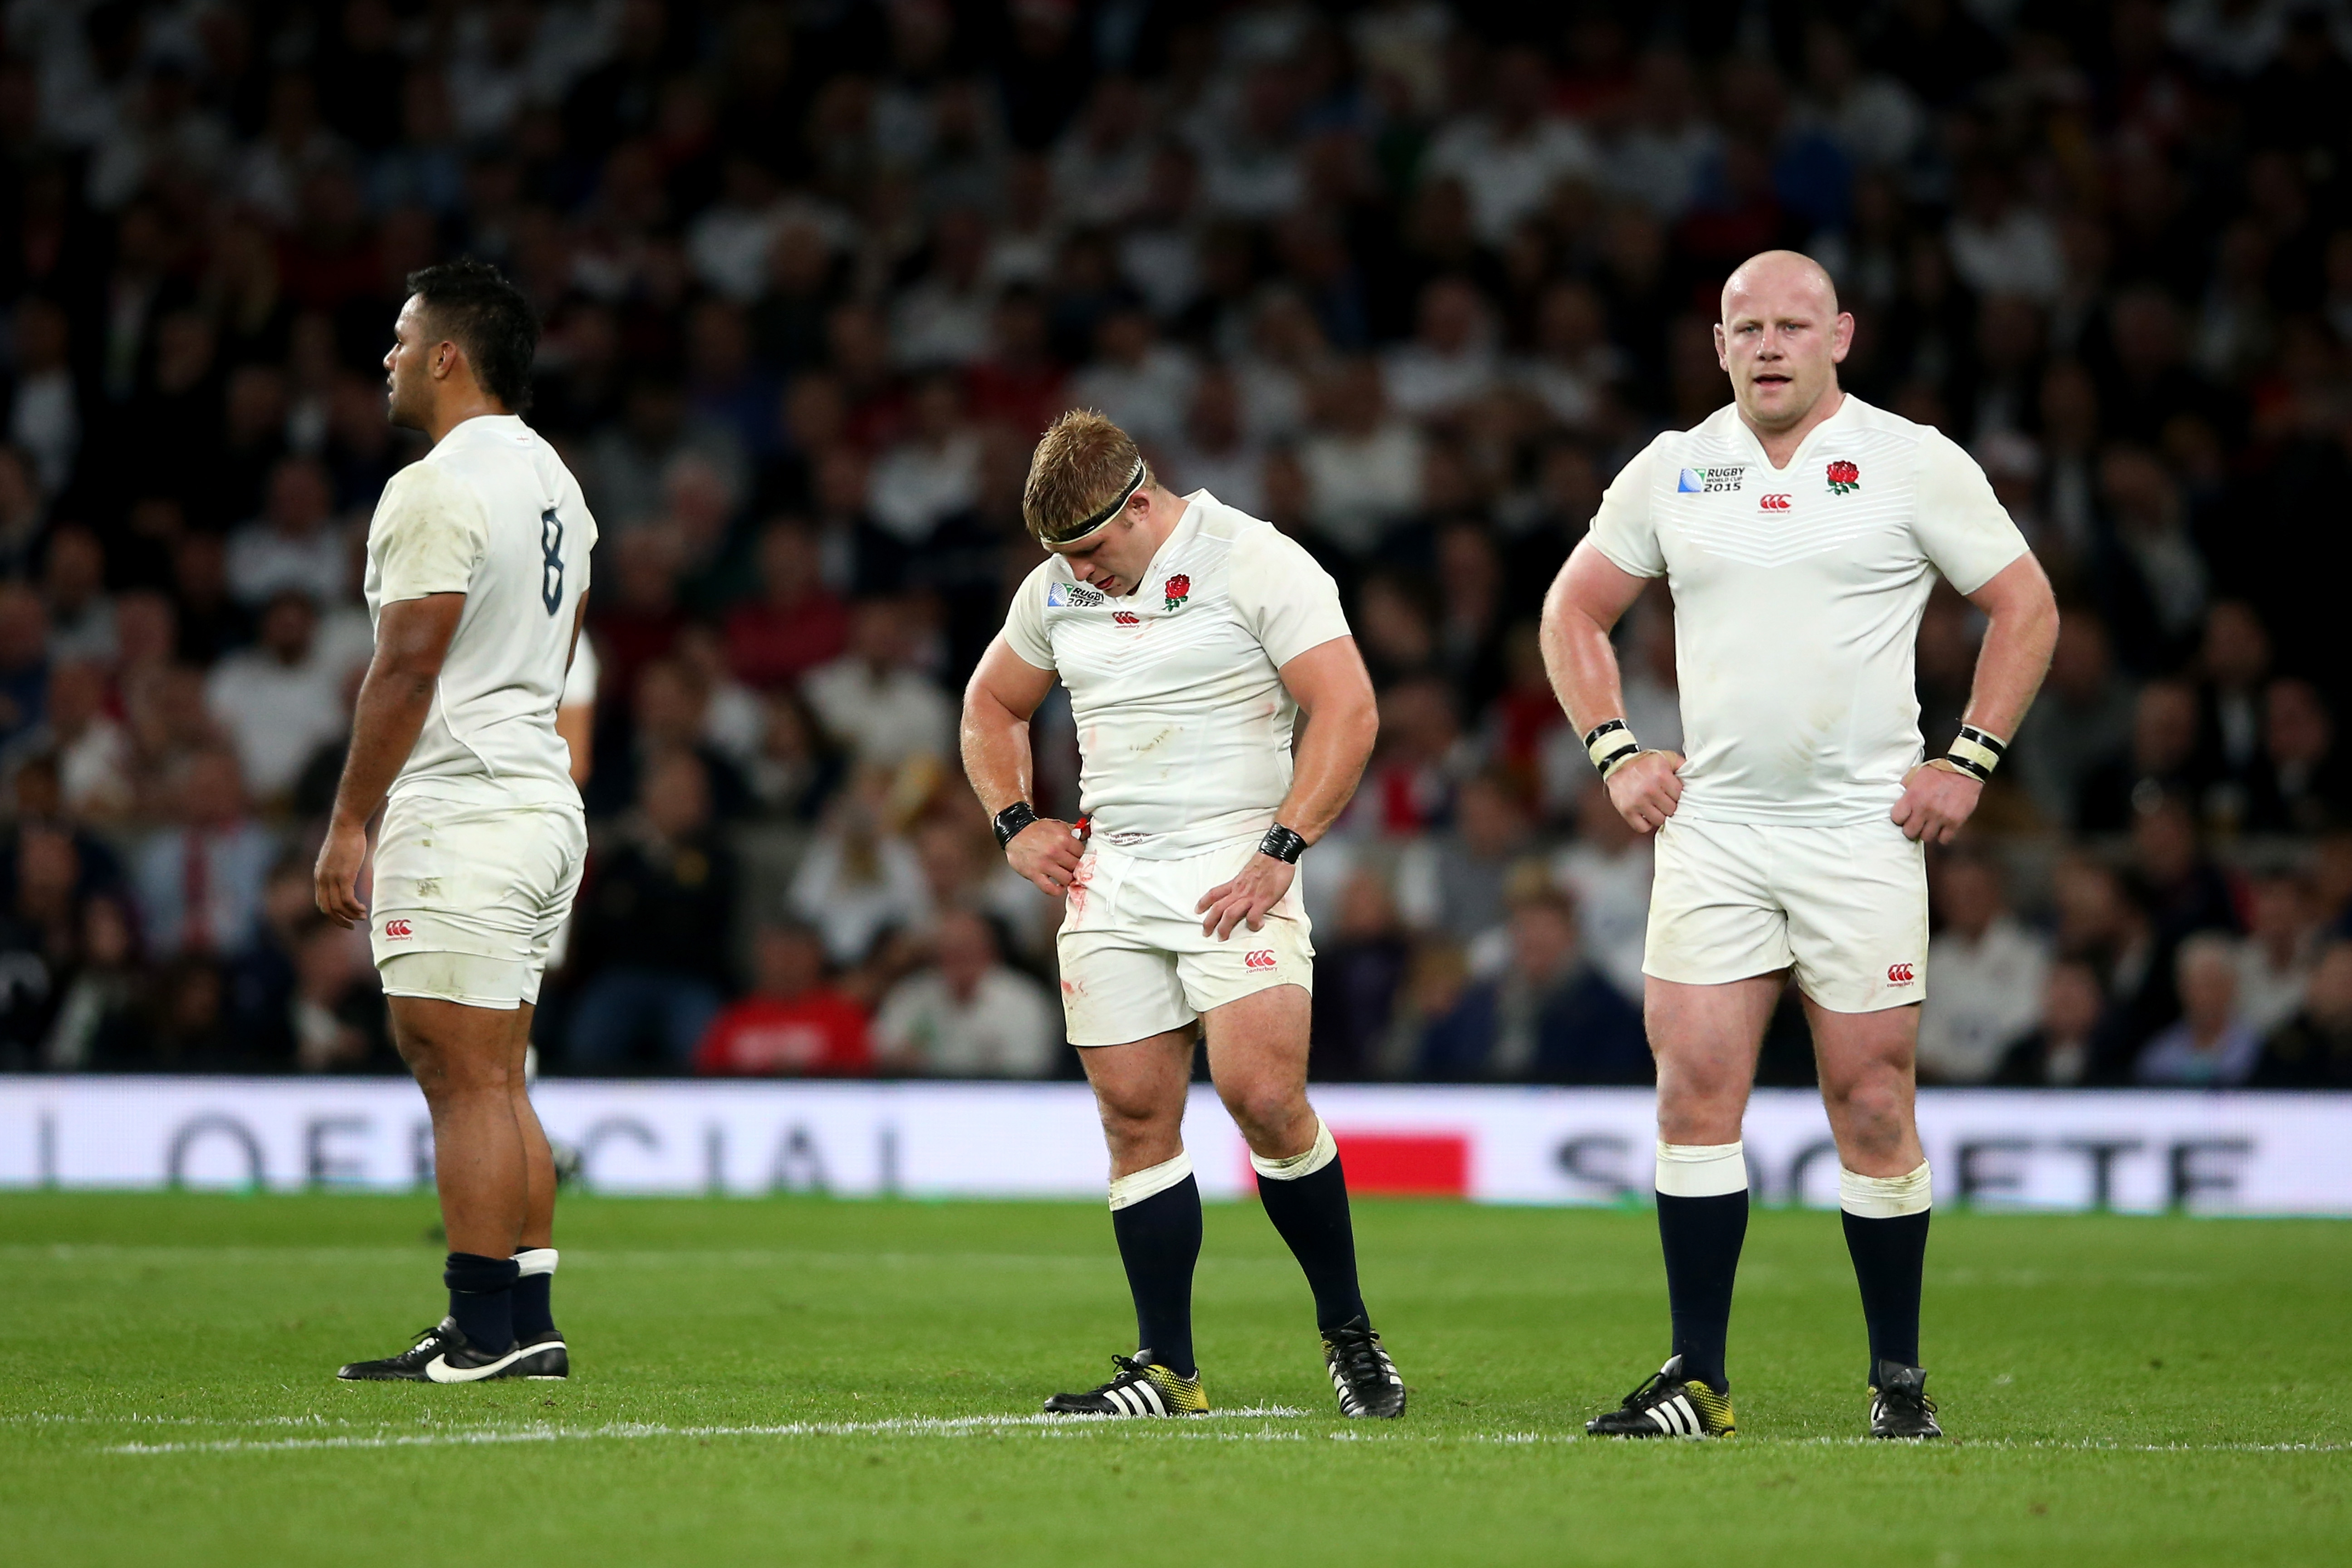 LONDON, ENGLAND - SEPTEMBER 26: (L-R) Billy Vunipola, Tom Youngs and Dan Cole of England look dejected during the 2015 Rugby World Cup Pool A match between England and Wales at Twickenham Stadium on September 26, 2015 in London, United Kingdom. (Photo by David Rogers/Getty Images)